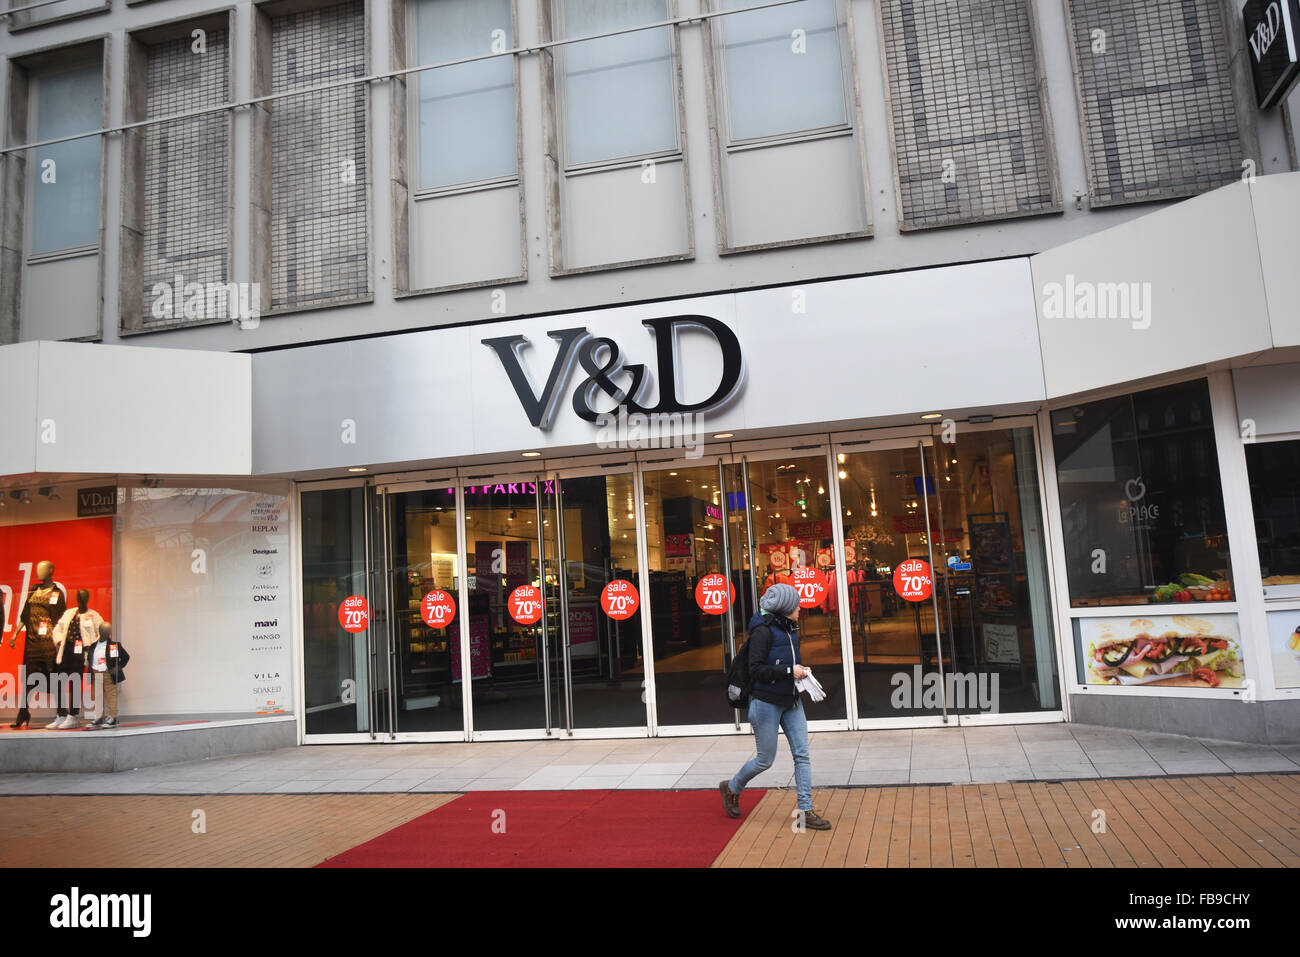 Vroom & Dreesmann (also known as V&D) is a bankrupt Dutch chain of department stores Stock Photo